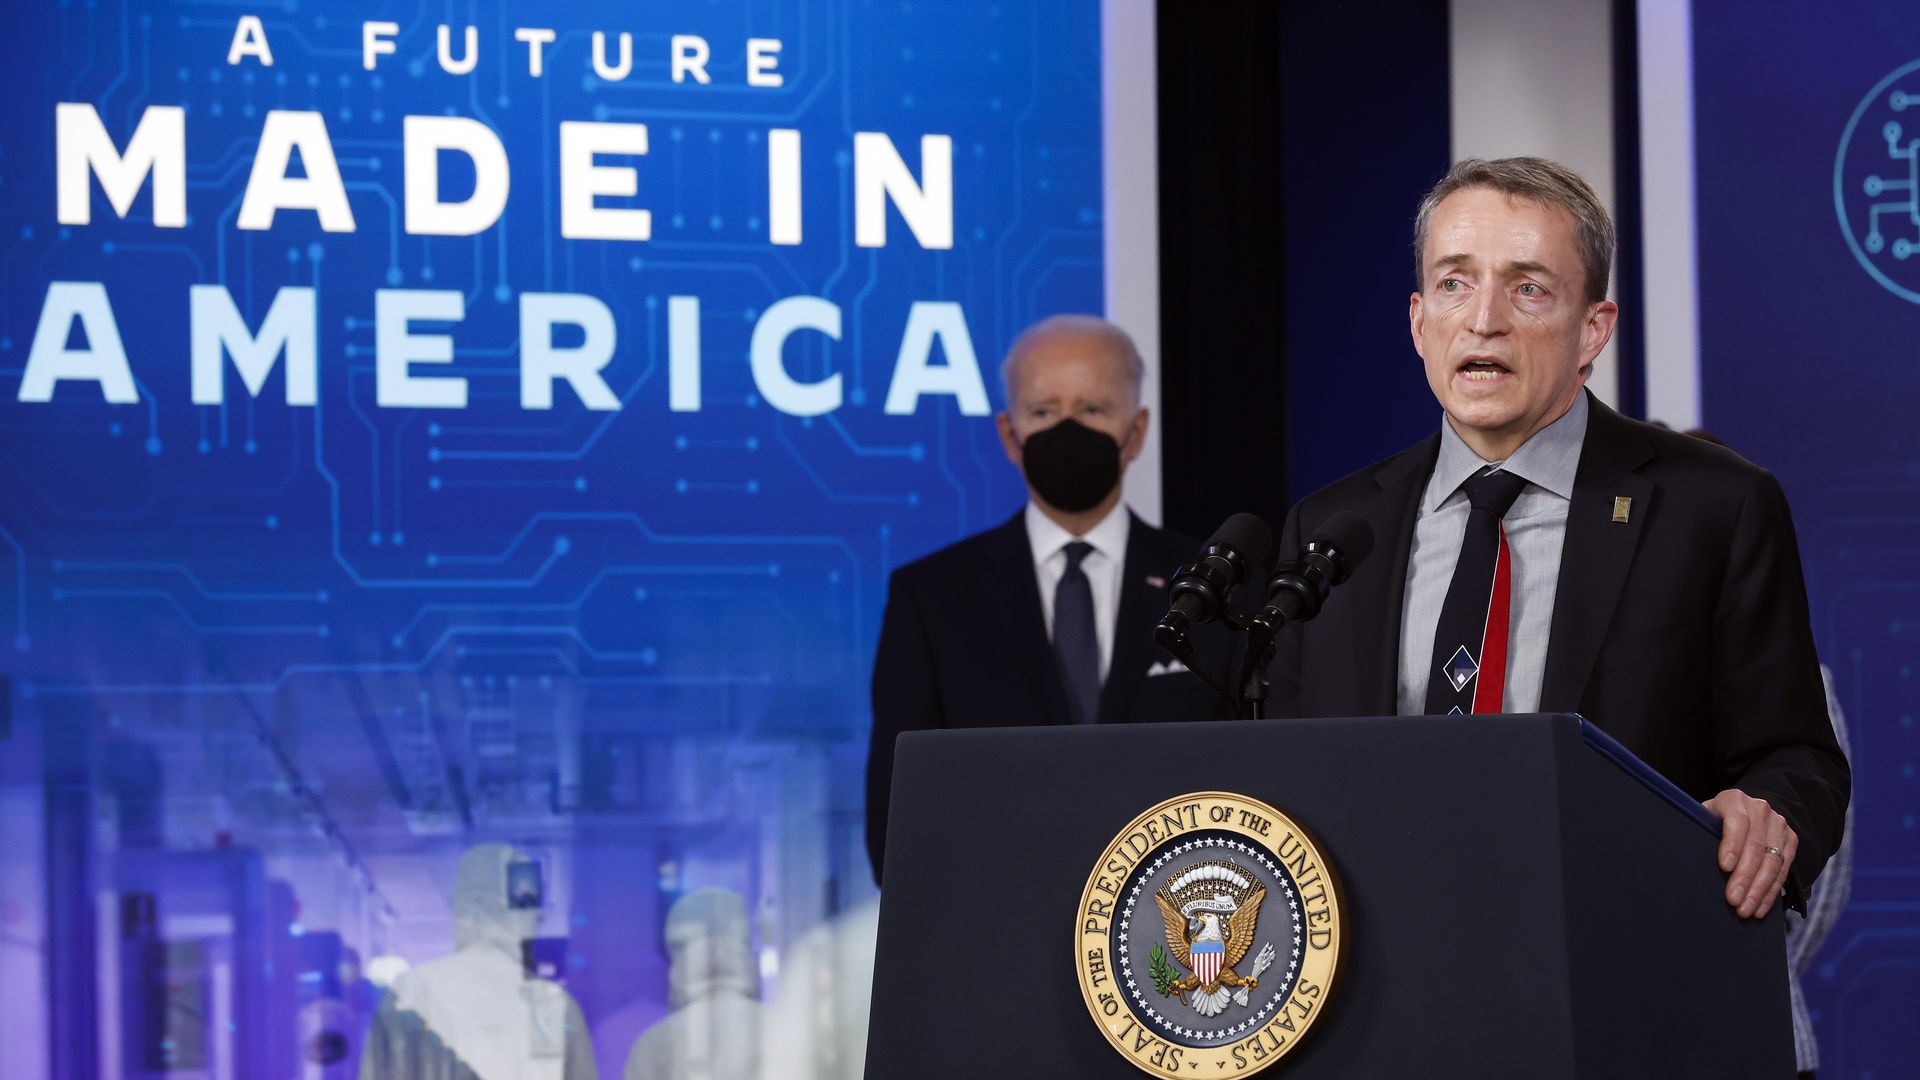 Intel CEO Patrick Gelsinger at a presidential lectern as President Joe Biden looks on. A wall poster reads "A Future Made in America."